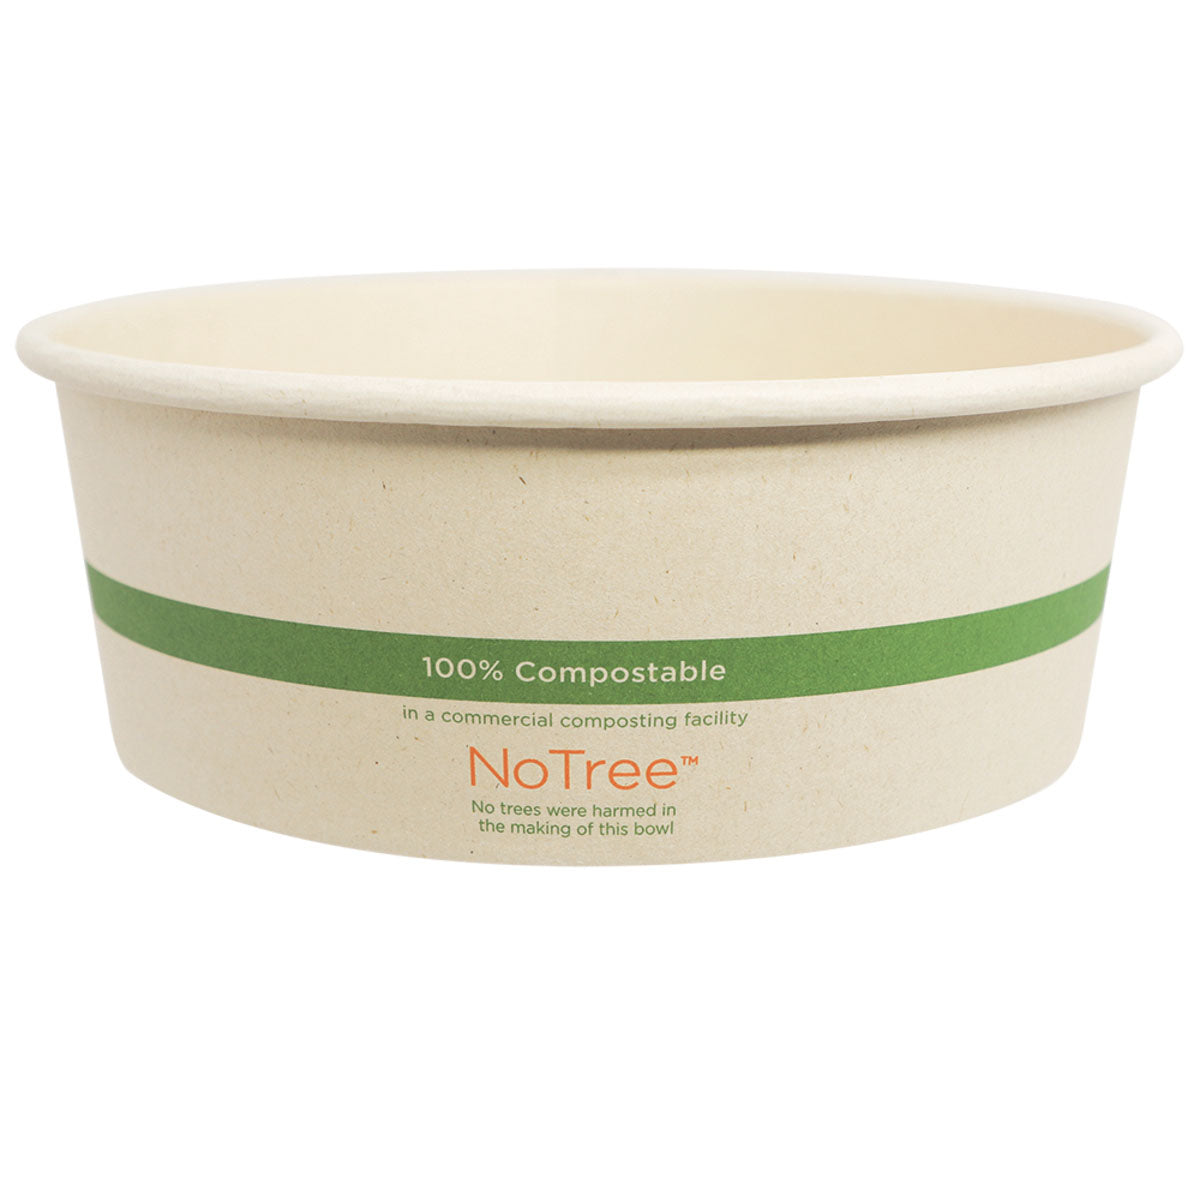 EcoQuality 24oz Disposable Bowls with Clear Lids - Rectangular Compostable Sugarcane Fiber Biodegradable Paper Bowls Eco-Friendly Take Out Food